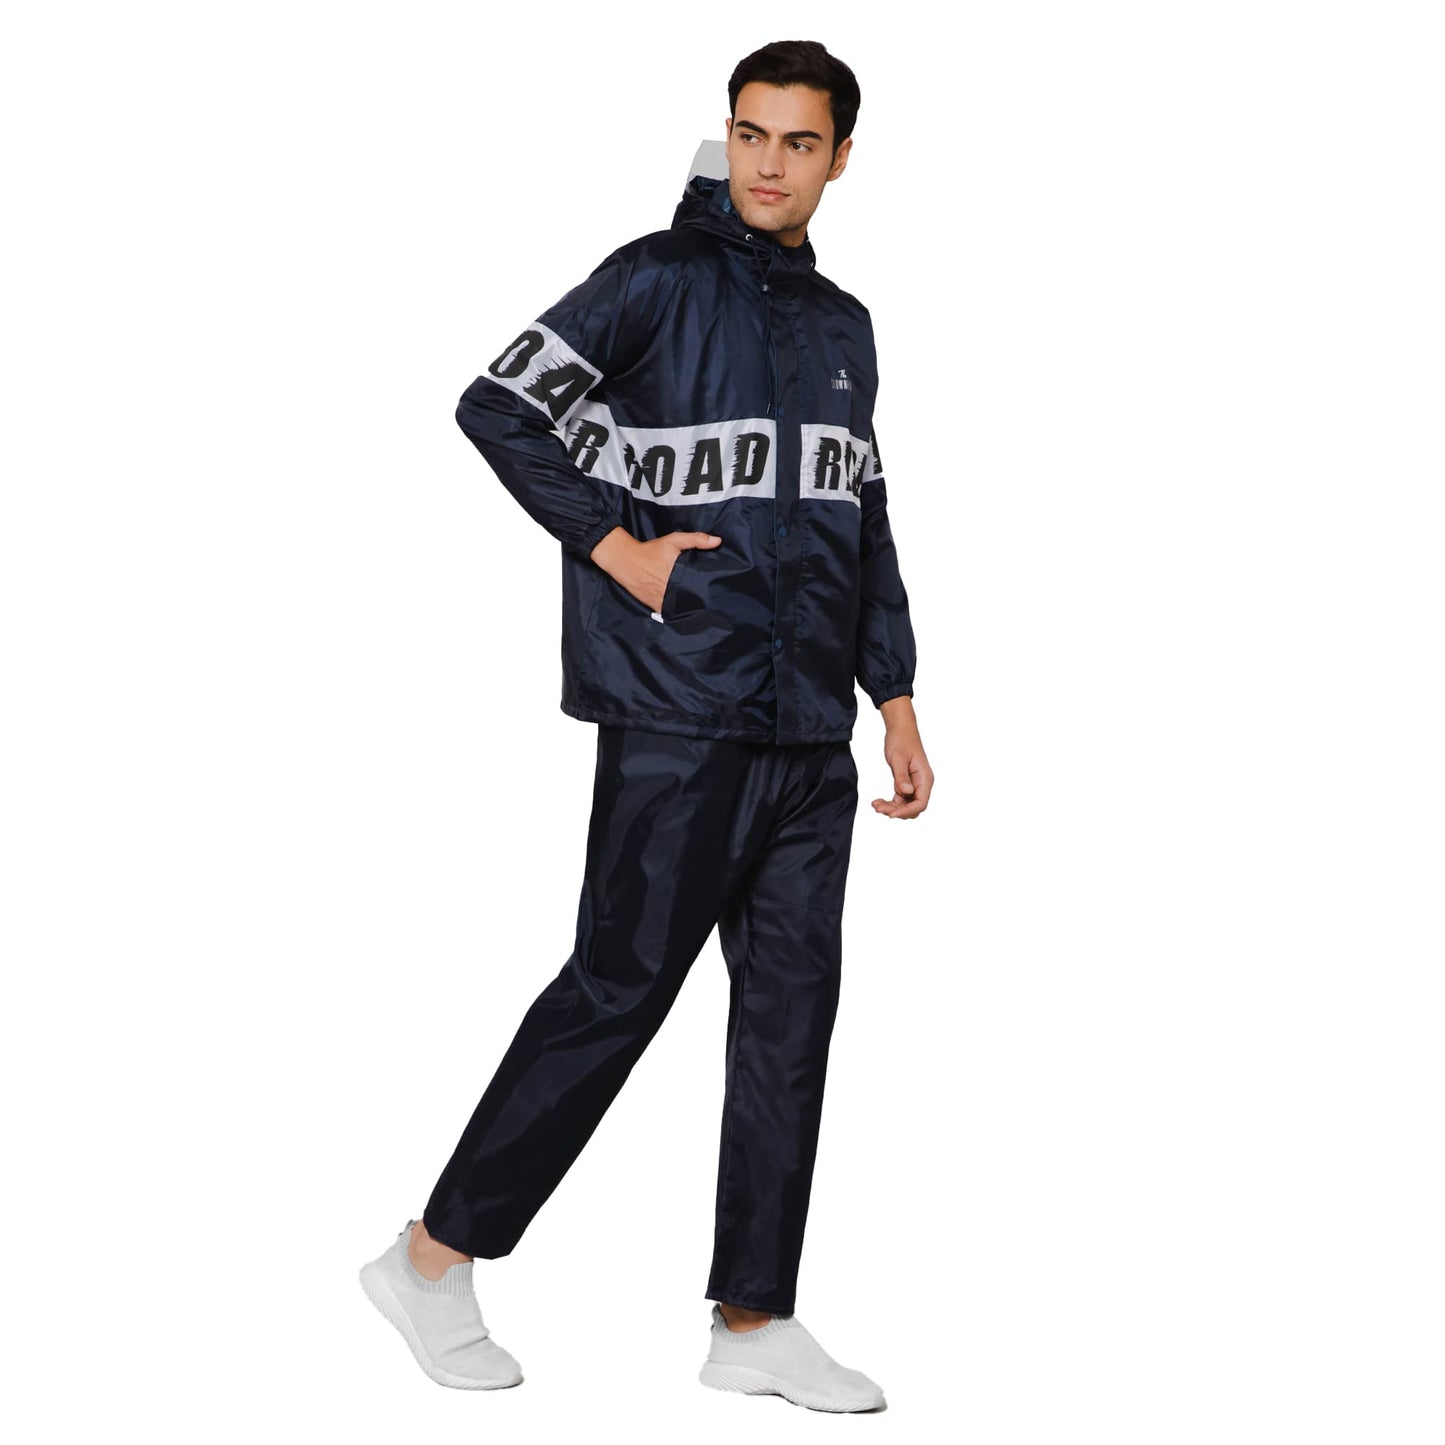 THE CLOWNFISH Road Rider Men's Waterproof Raincoat Polyester Double Coating Reversible Rain Suit with Hood & Inner Mobile Pocket. Set of Top and Bottom. Printed Plastic Pouch (Navy Blue, Large)